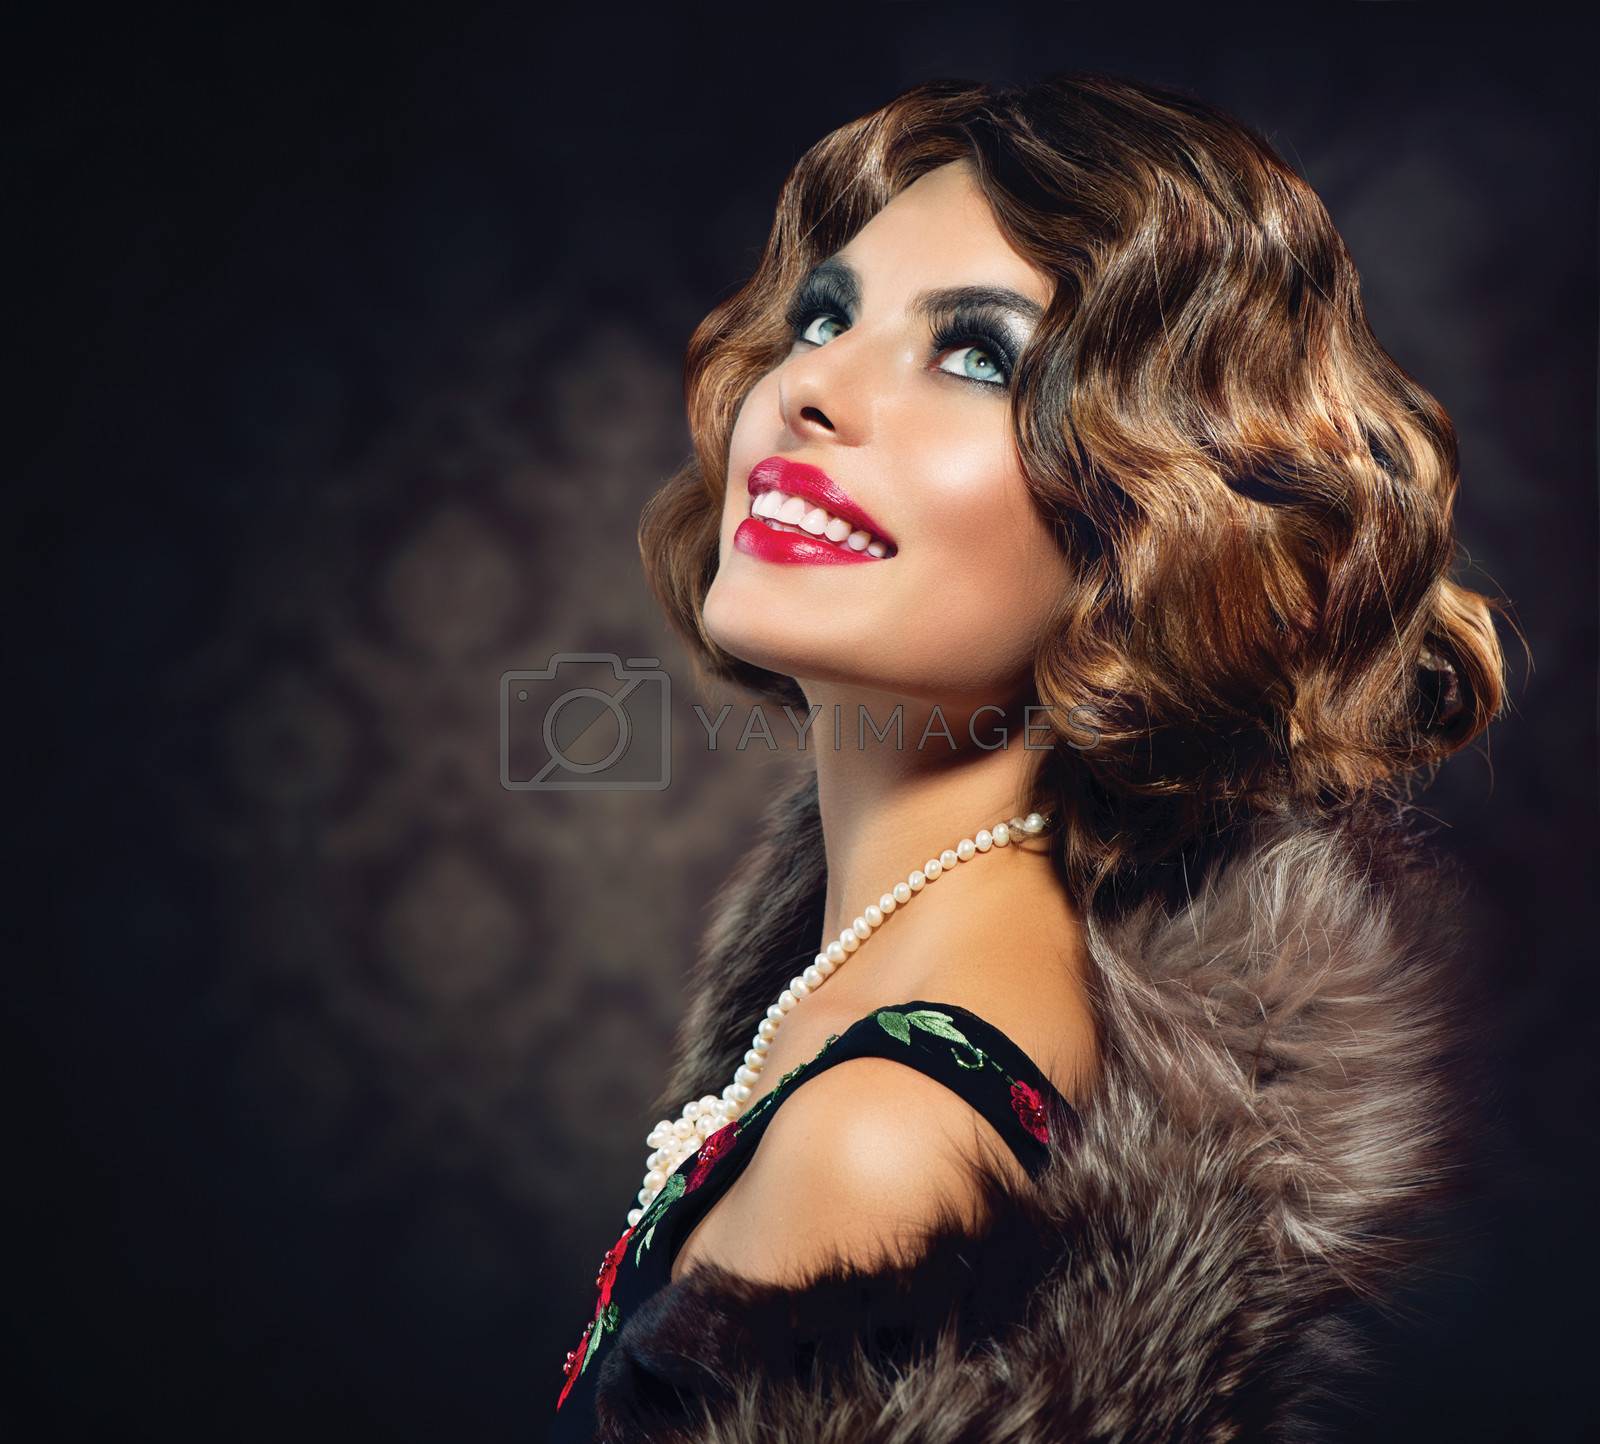 Royalty free image of Retro Woman Portrait. Vintage Styled Photo by SubbotinaA